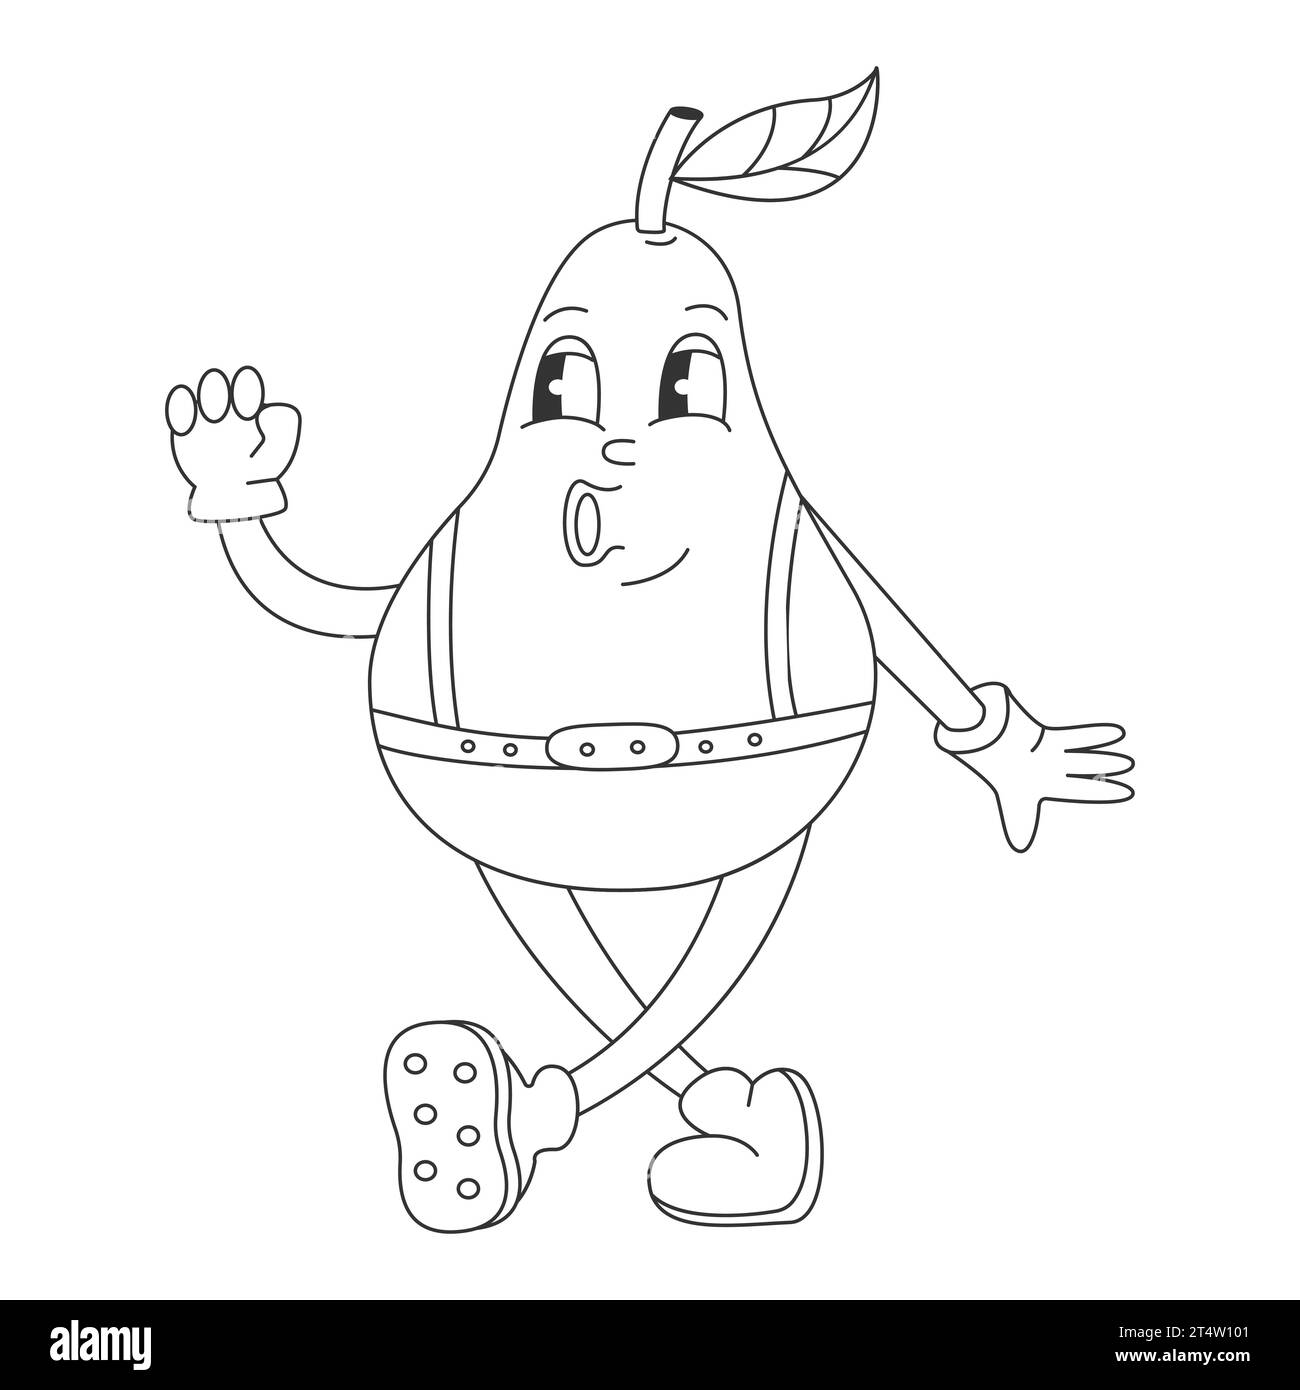 Coloring page with Fruit Retro Groovy Cartoon Hippie Character. Comic Pear Character on transparent background. Groovy Summer Vector Illustration Stock Vector